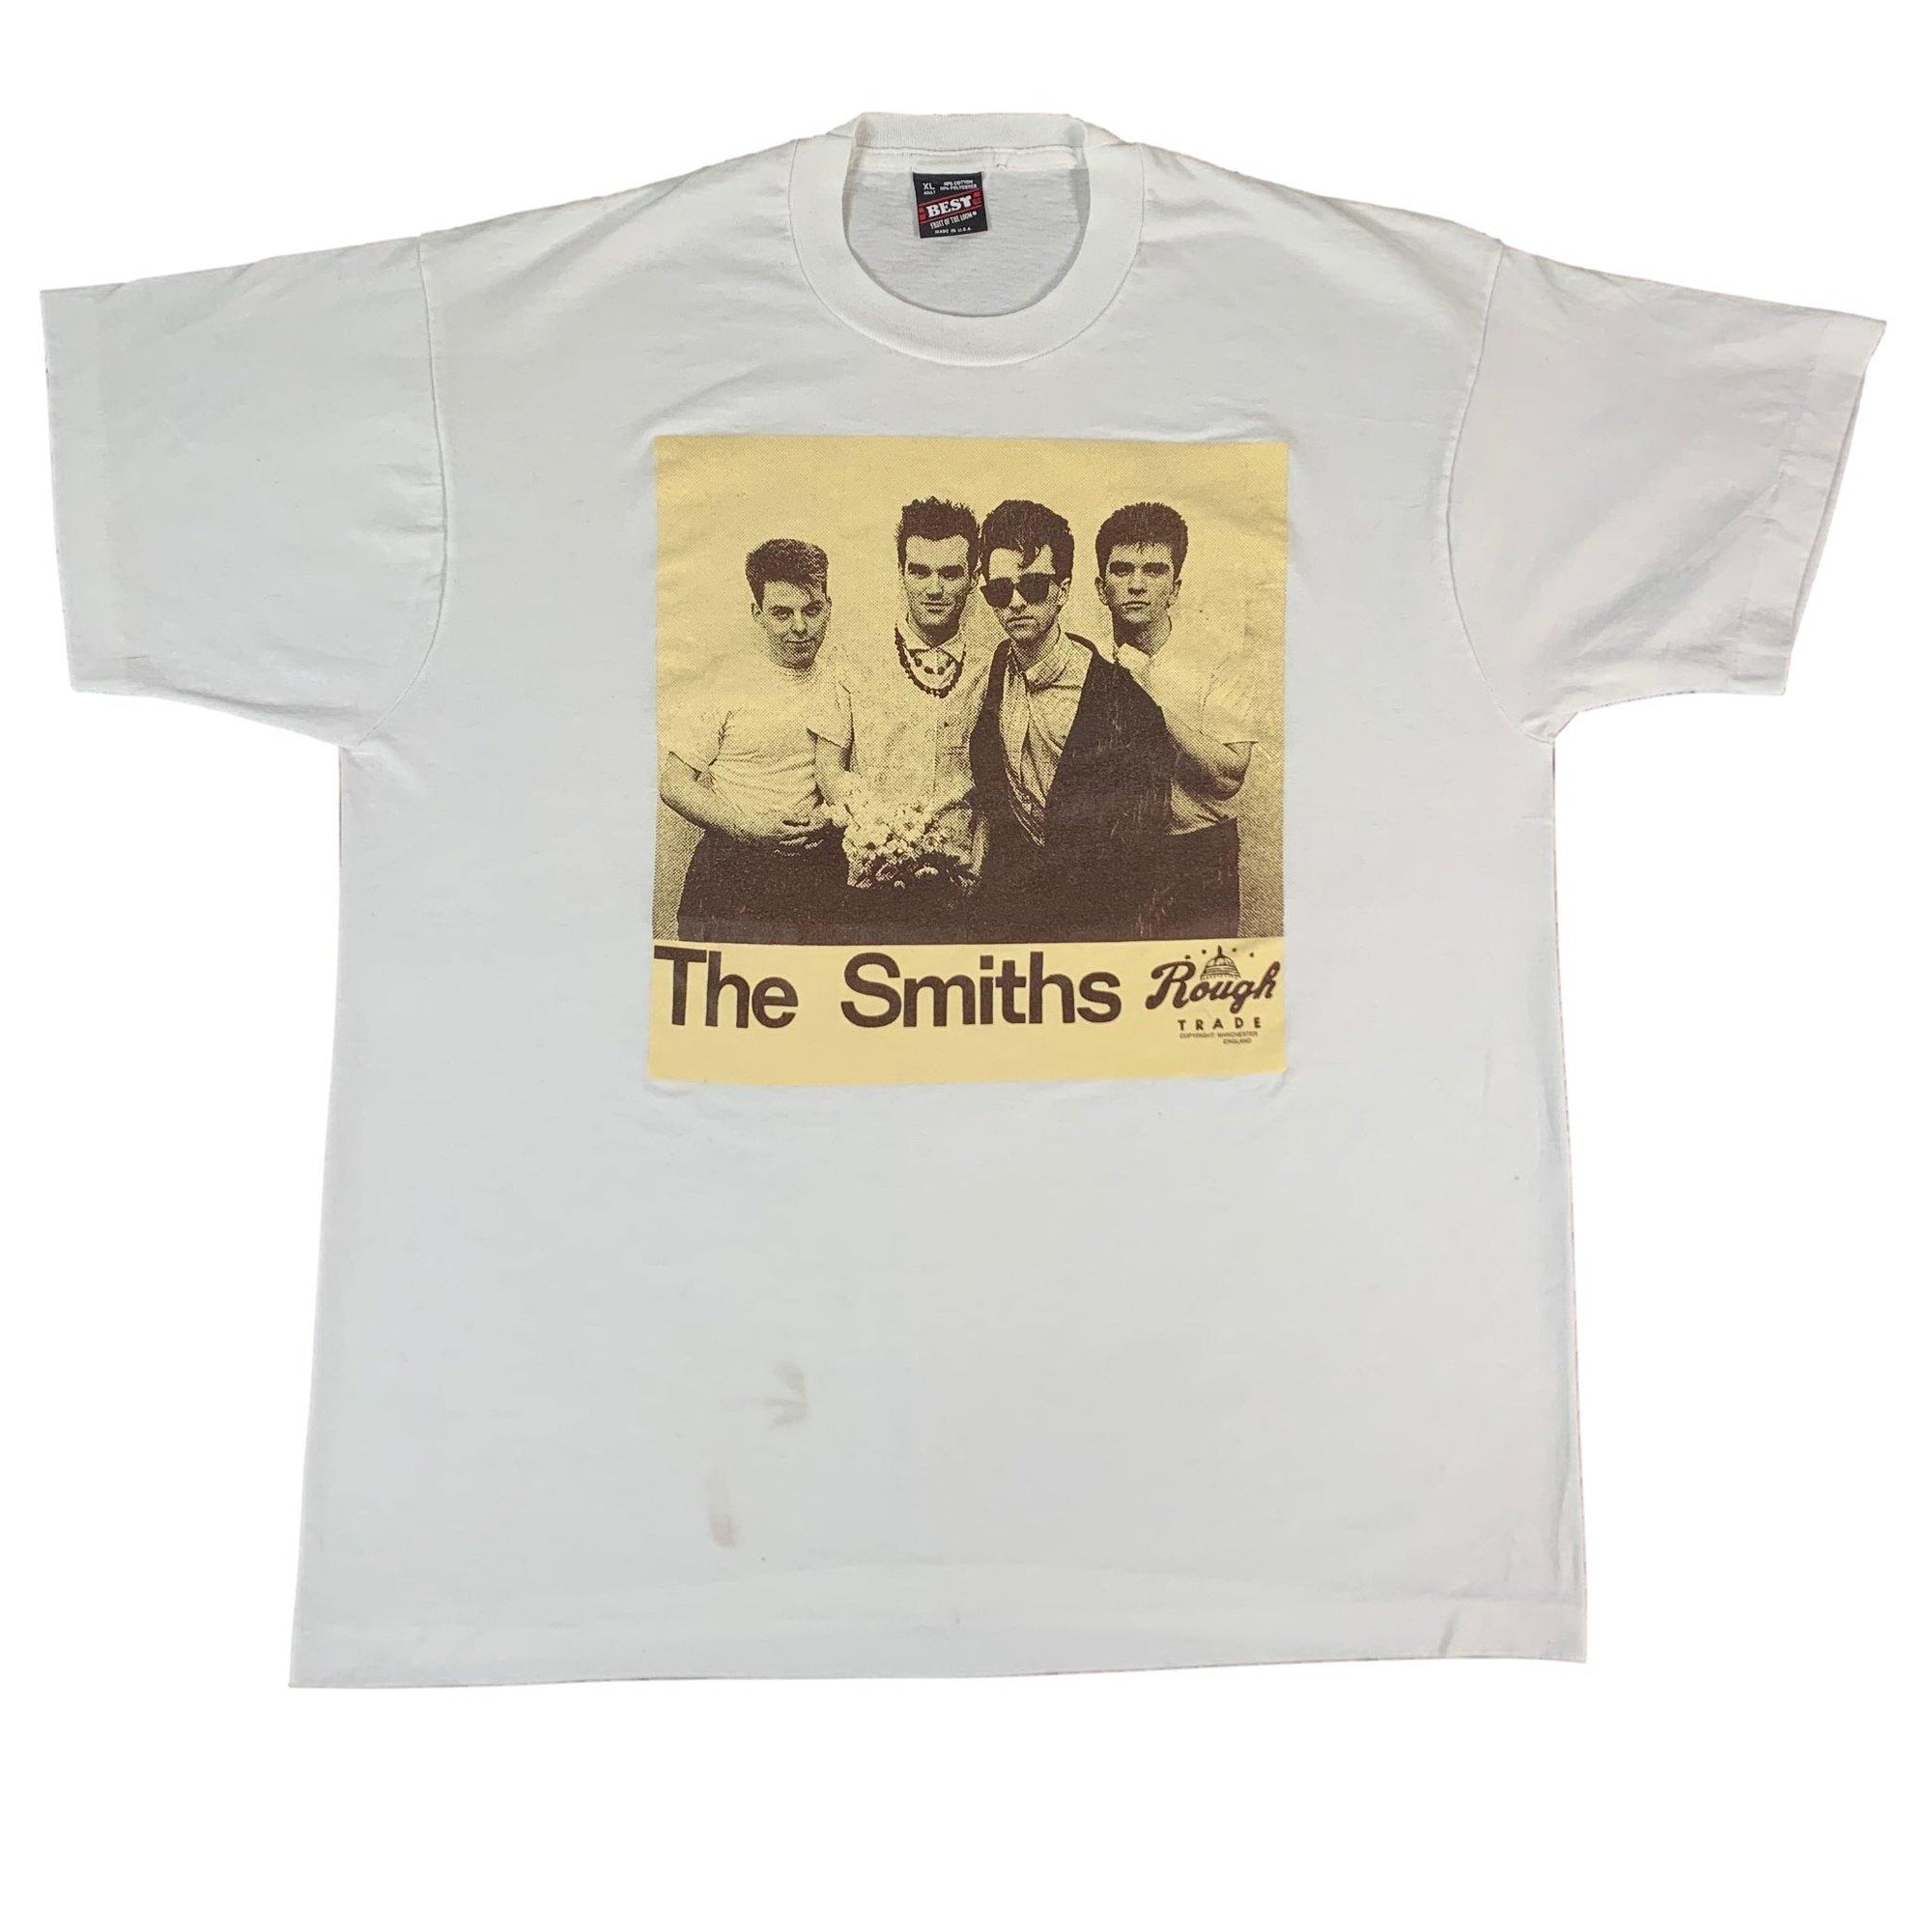 Vintage The Smiths "Rough Trade" T-Shirt - jointcustodydc